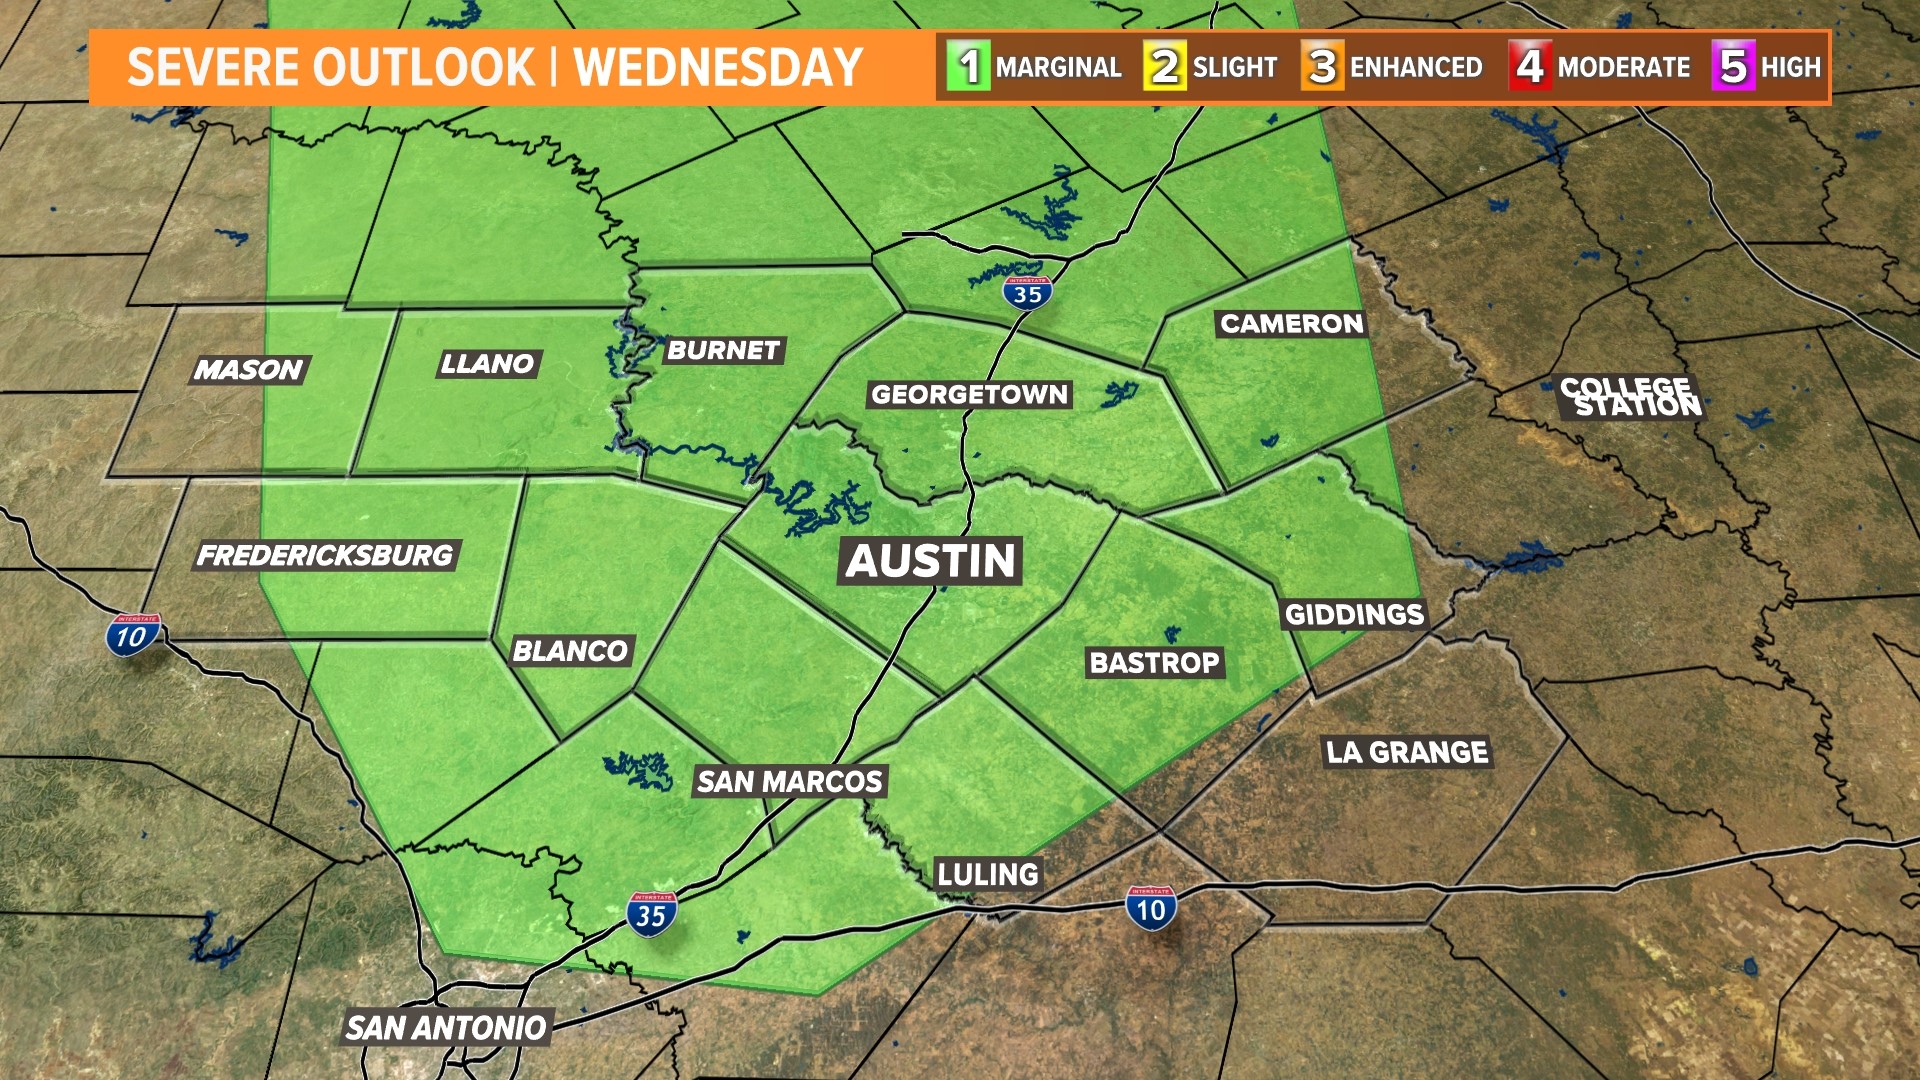 Strong storms possible Wednesday afternoon